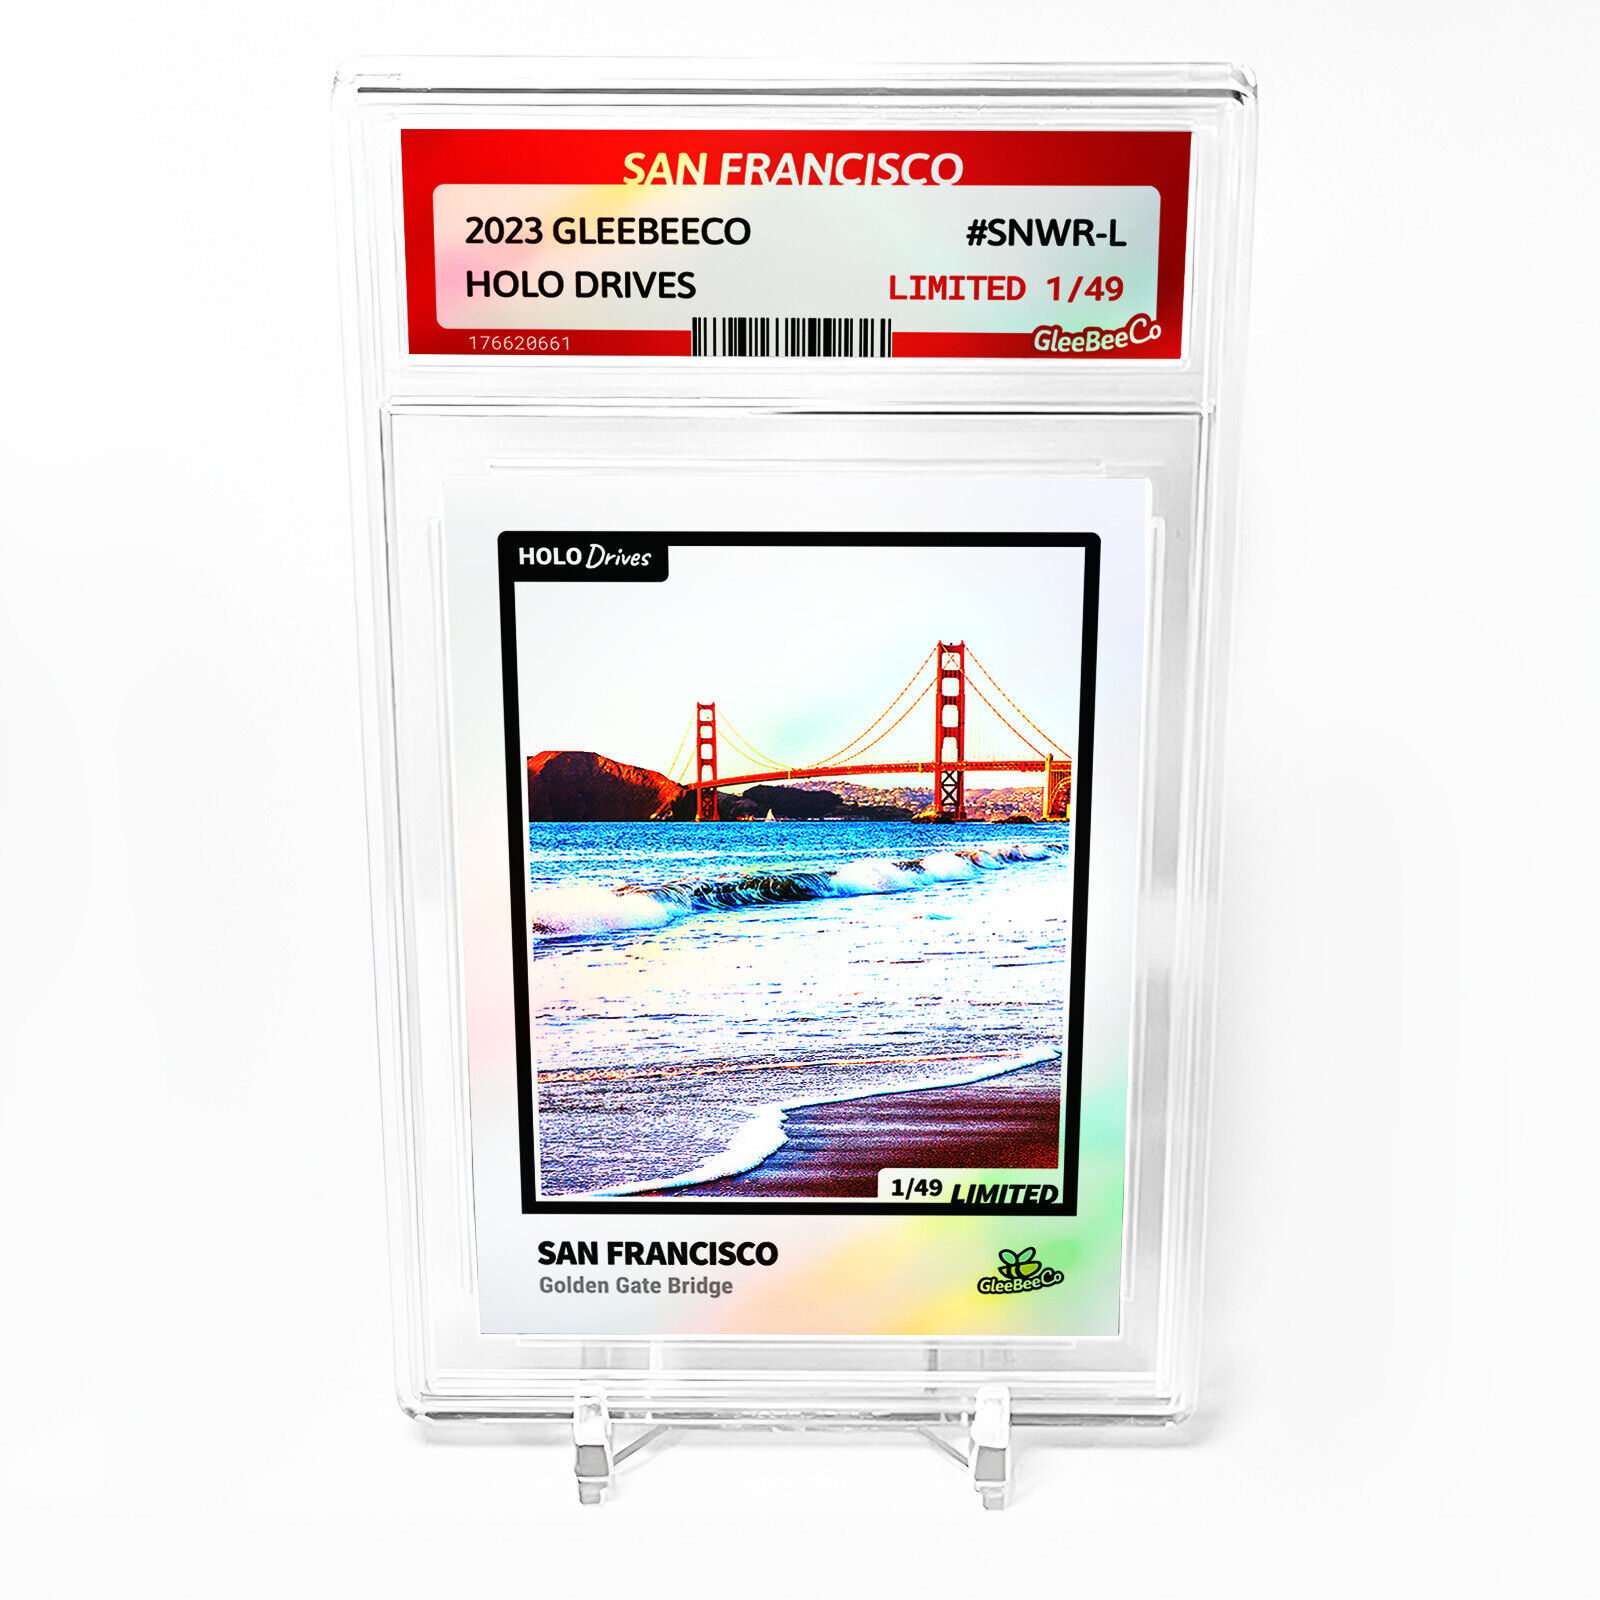 SAN FRANCISCO Card 2023 GleeBeeCo Holo Drives Slabbed #SNWR-L Only /49